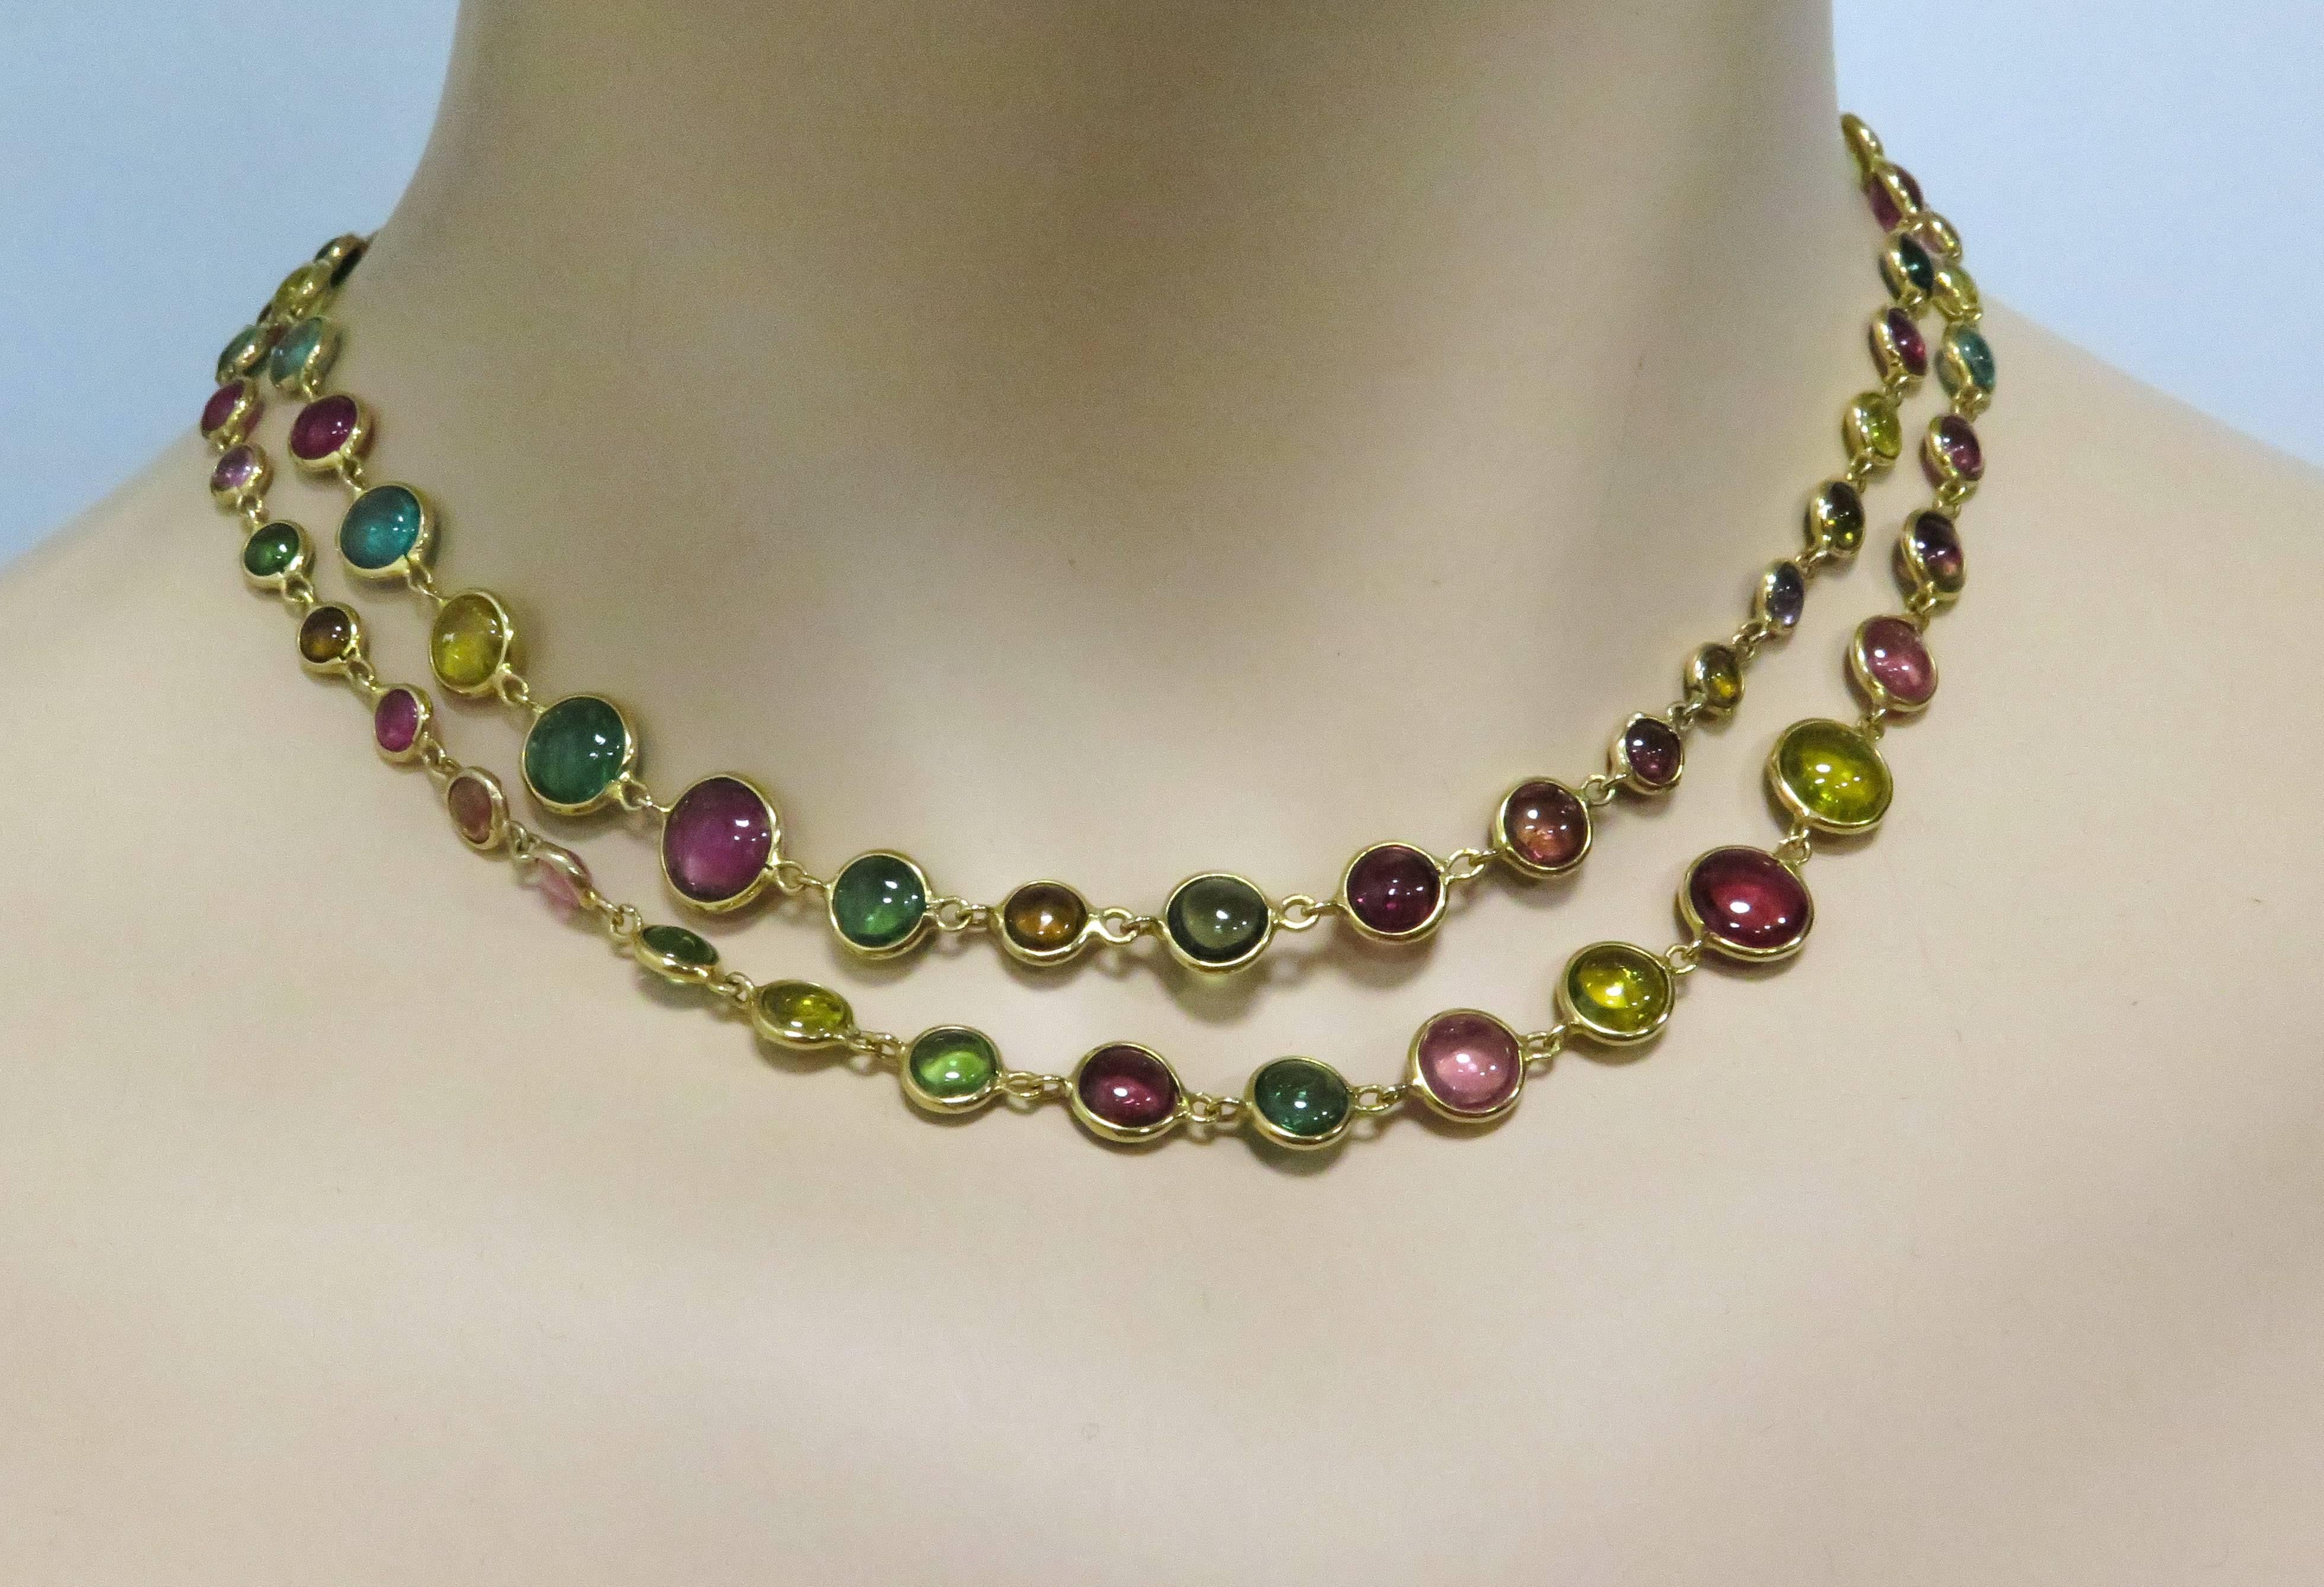 This gorgeous multi-colored tourmaline necklace is designed by Peggy Daven.
The Tourmaline beads range from approximately 5.5mm to 8.5mm in diameter each, in a flattened cabochon shape individually set in a 18k yellow gold bezel. 30 inches long